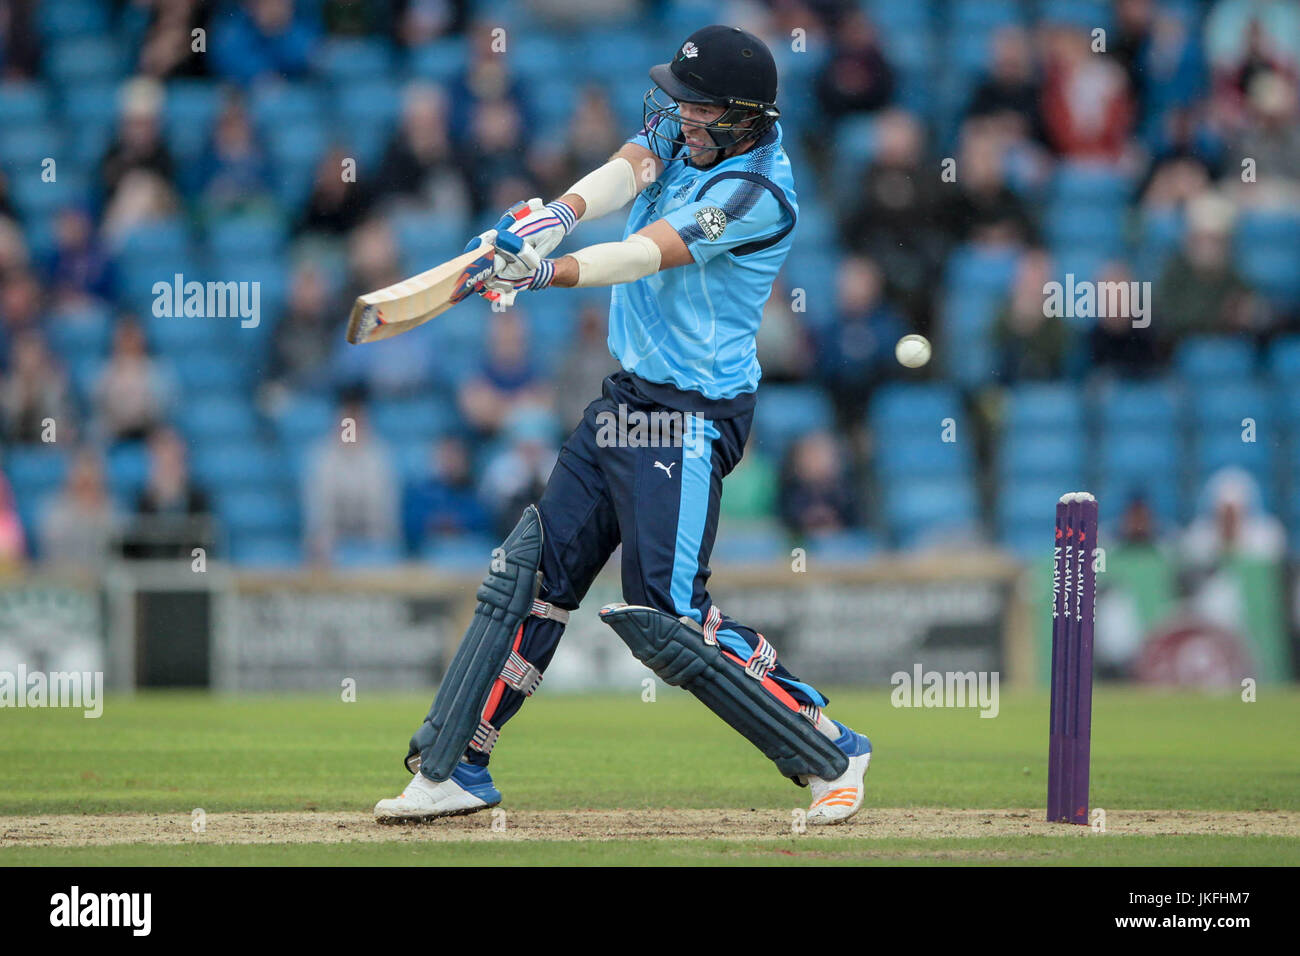 David Willey (Yorkshire CCC) hits the ball for four during the Natwest T20 Blast game between Yorkshire Vikings v Worcestershire Rapids on Sunday 23 July 2017. Photo by Mark P Doherty. Stock Photo